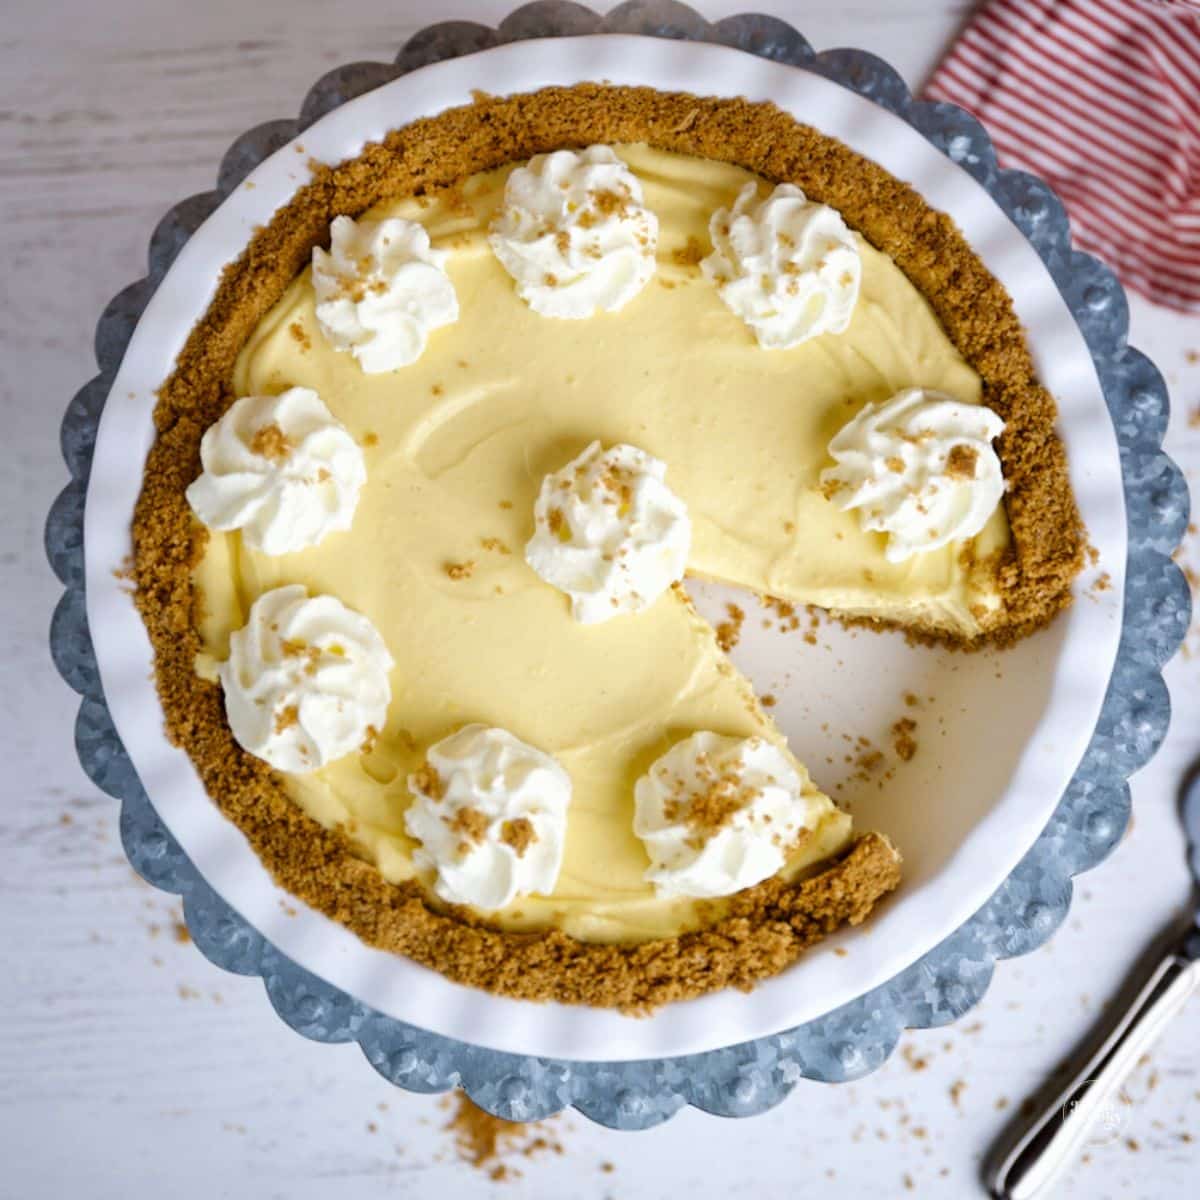 No bake eggnog pie in a white pie dish, with one slice of the pie missing.